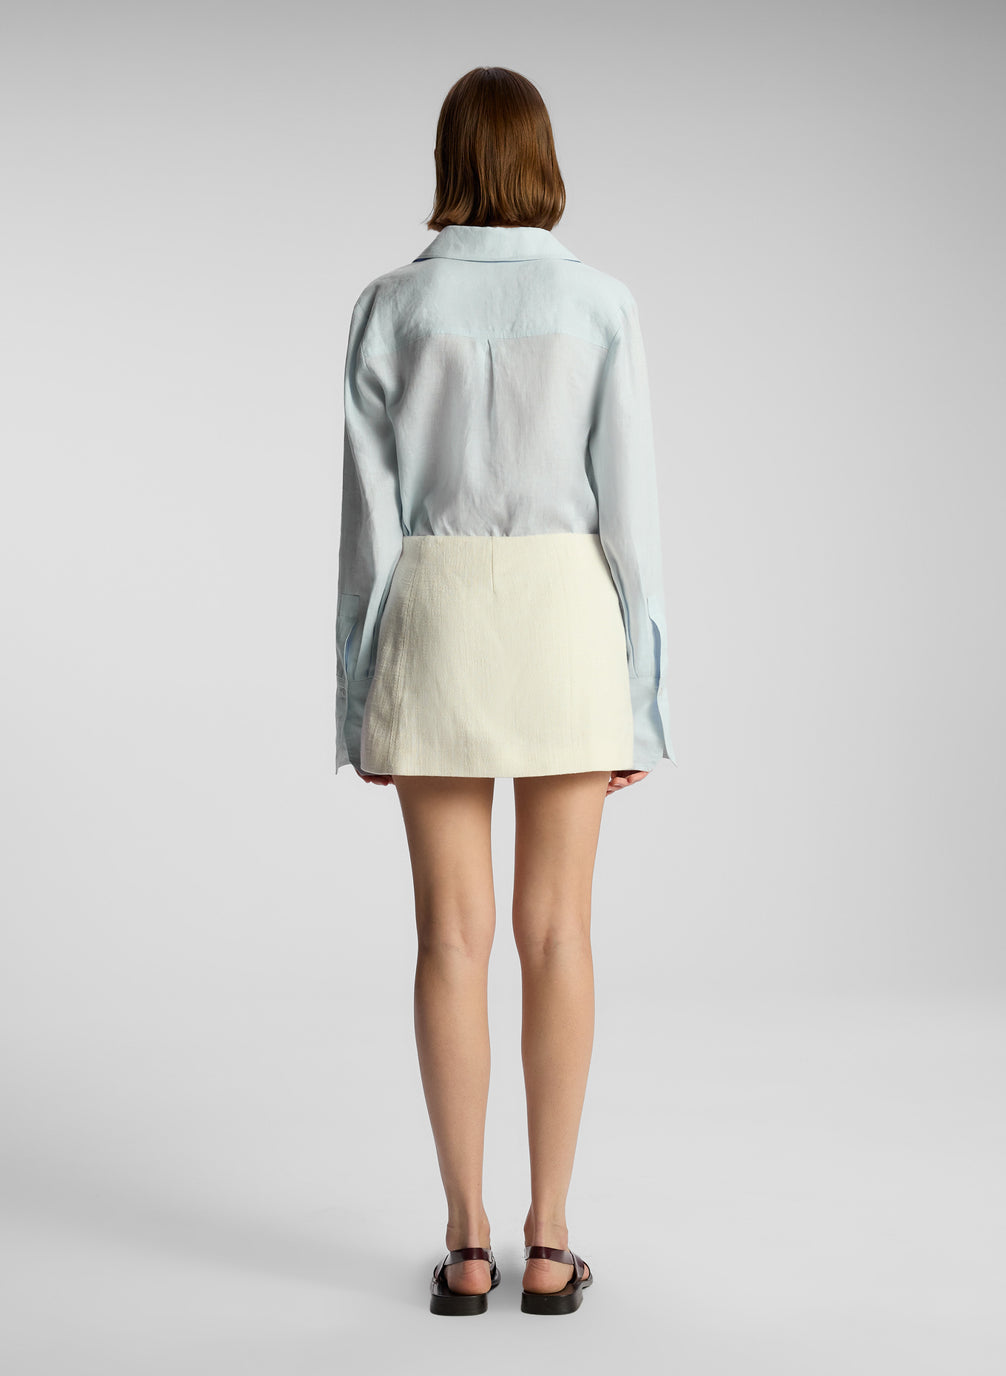 back view of woman wearing light blue button down and cream fringed mini skirt